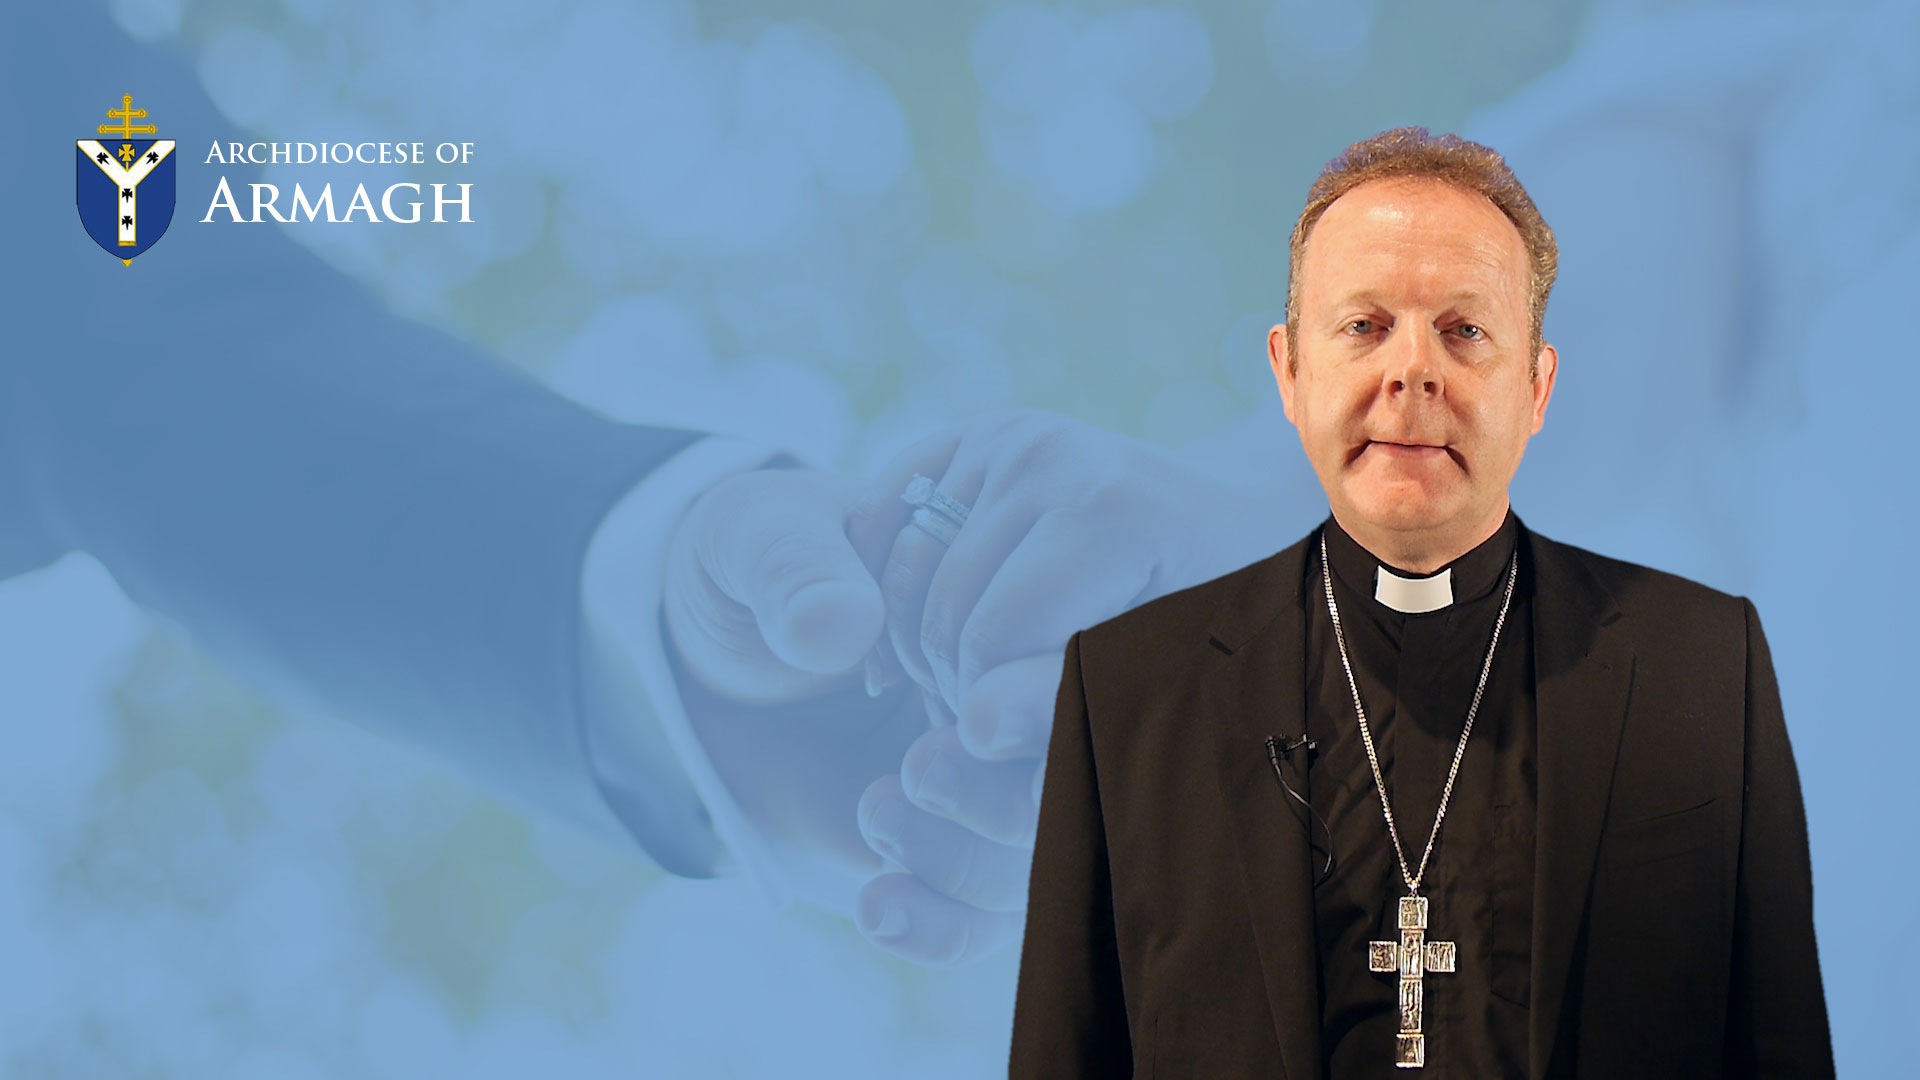 Marriage Referendum – Message from Archbishop Eamon Martin